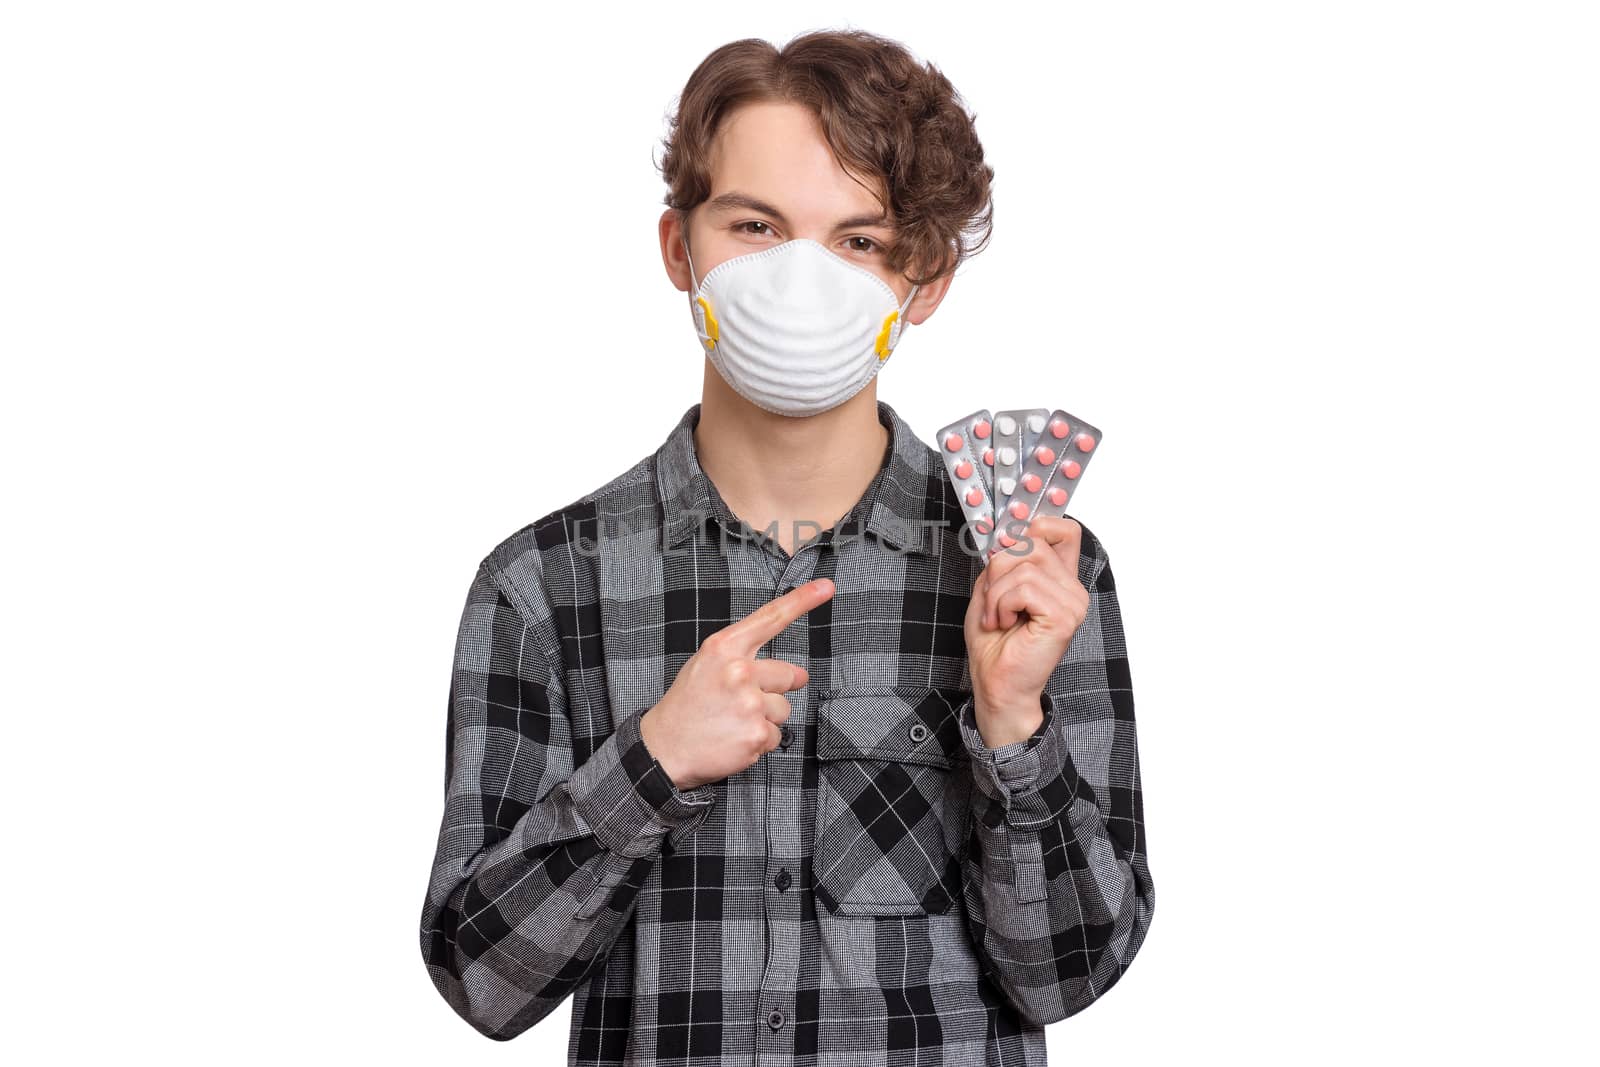 Concept of coronavirus quarantine. COVID-19 - home self isolation. Child wearing medical protective face mask to health protection from influenza virus, isolated on white. Teen boy holds pills.